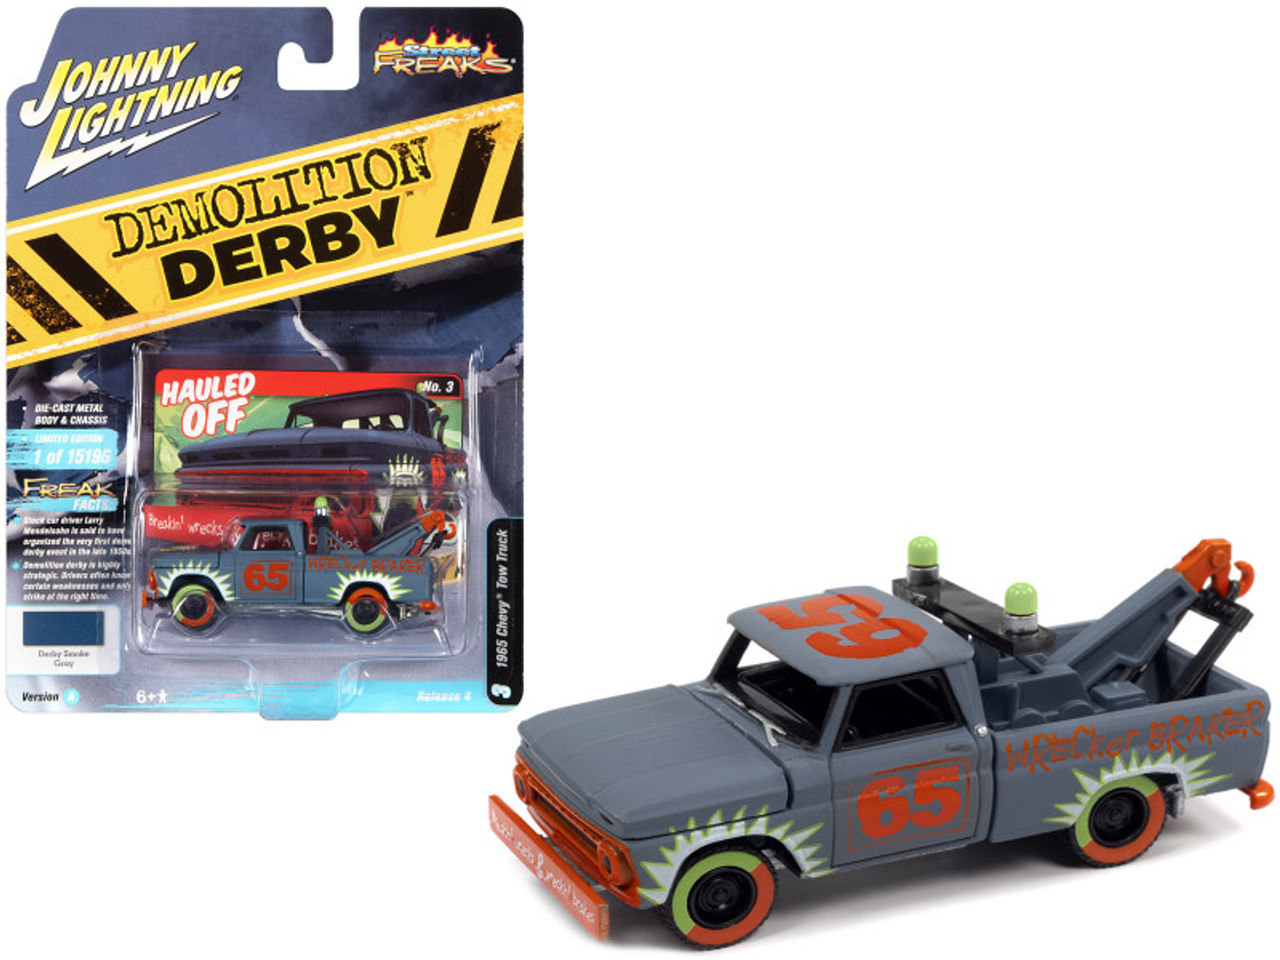 1965 Chevrolet Tow Truck #65 Derby Smoke Gray with Graphics "Demolition Derby" "Street Freaks" Series Limited Edition to 15196 pieces Worldwide 1/64 Diecast Model Car by Johnny Lightning